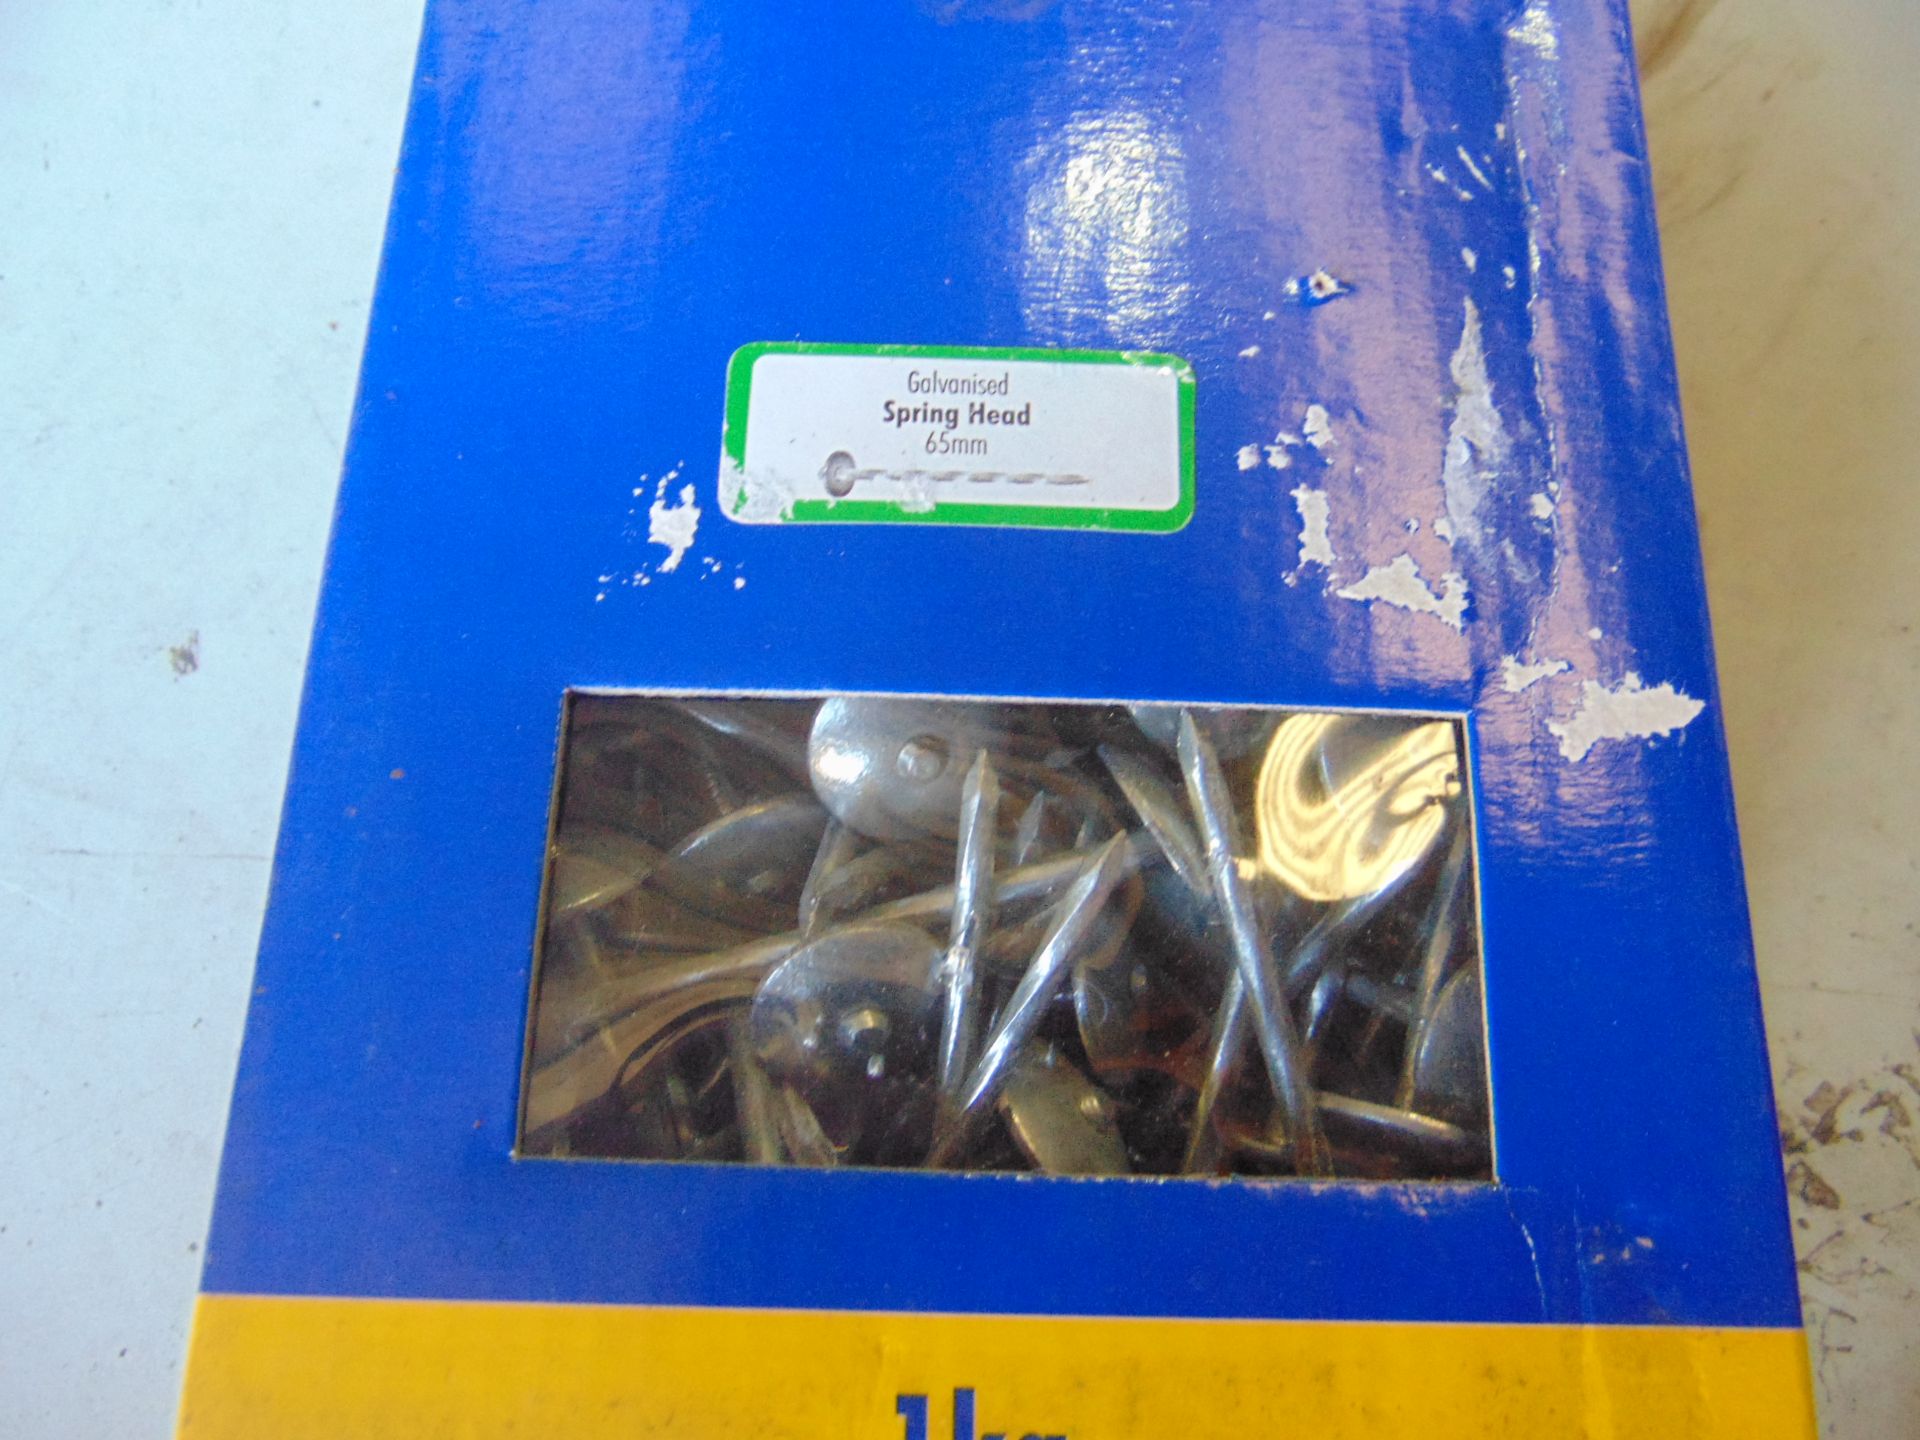 1 Kg Pack of Galvanised Spring Head 65mm Nails New - Image 2 of 2